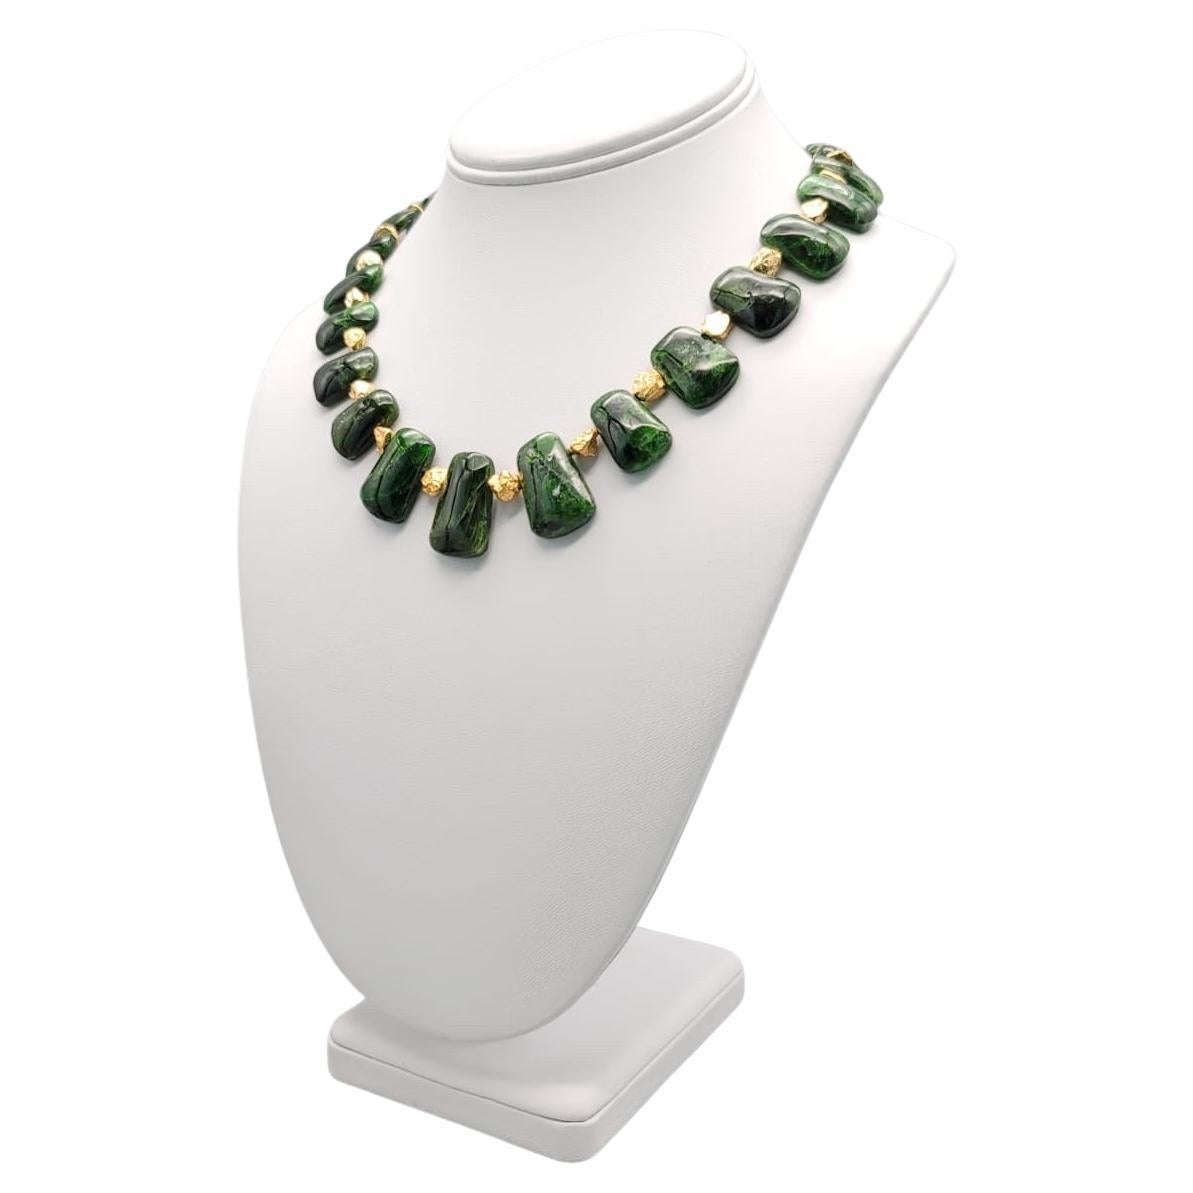 A.Jeschel Richly colored Chrome Diopside necklace